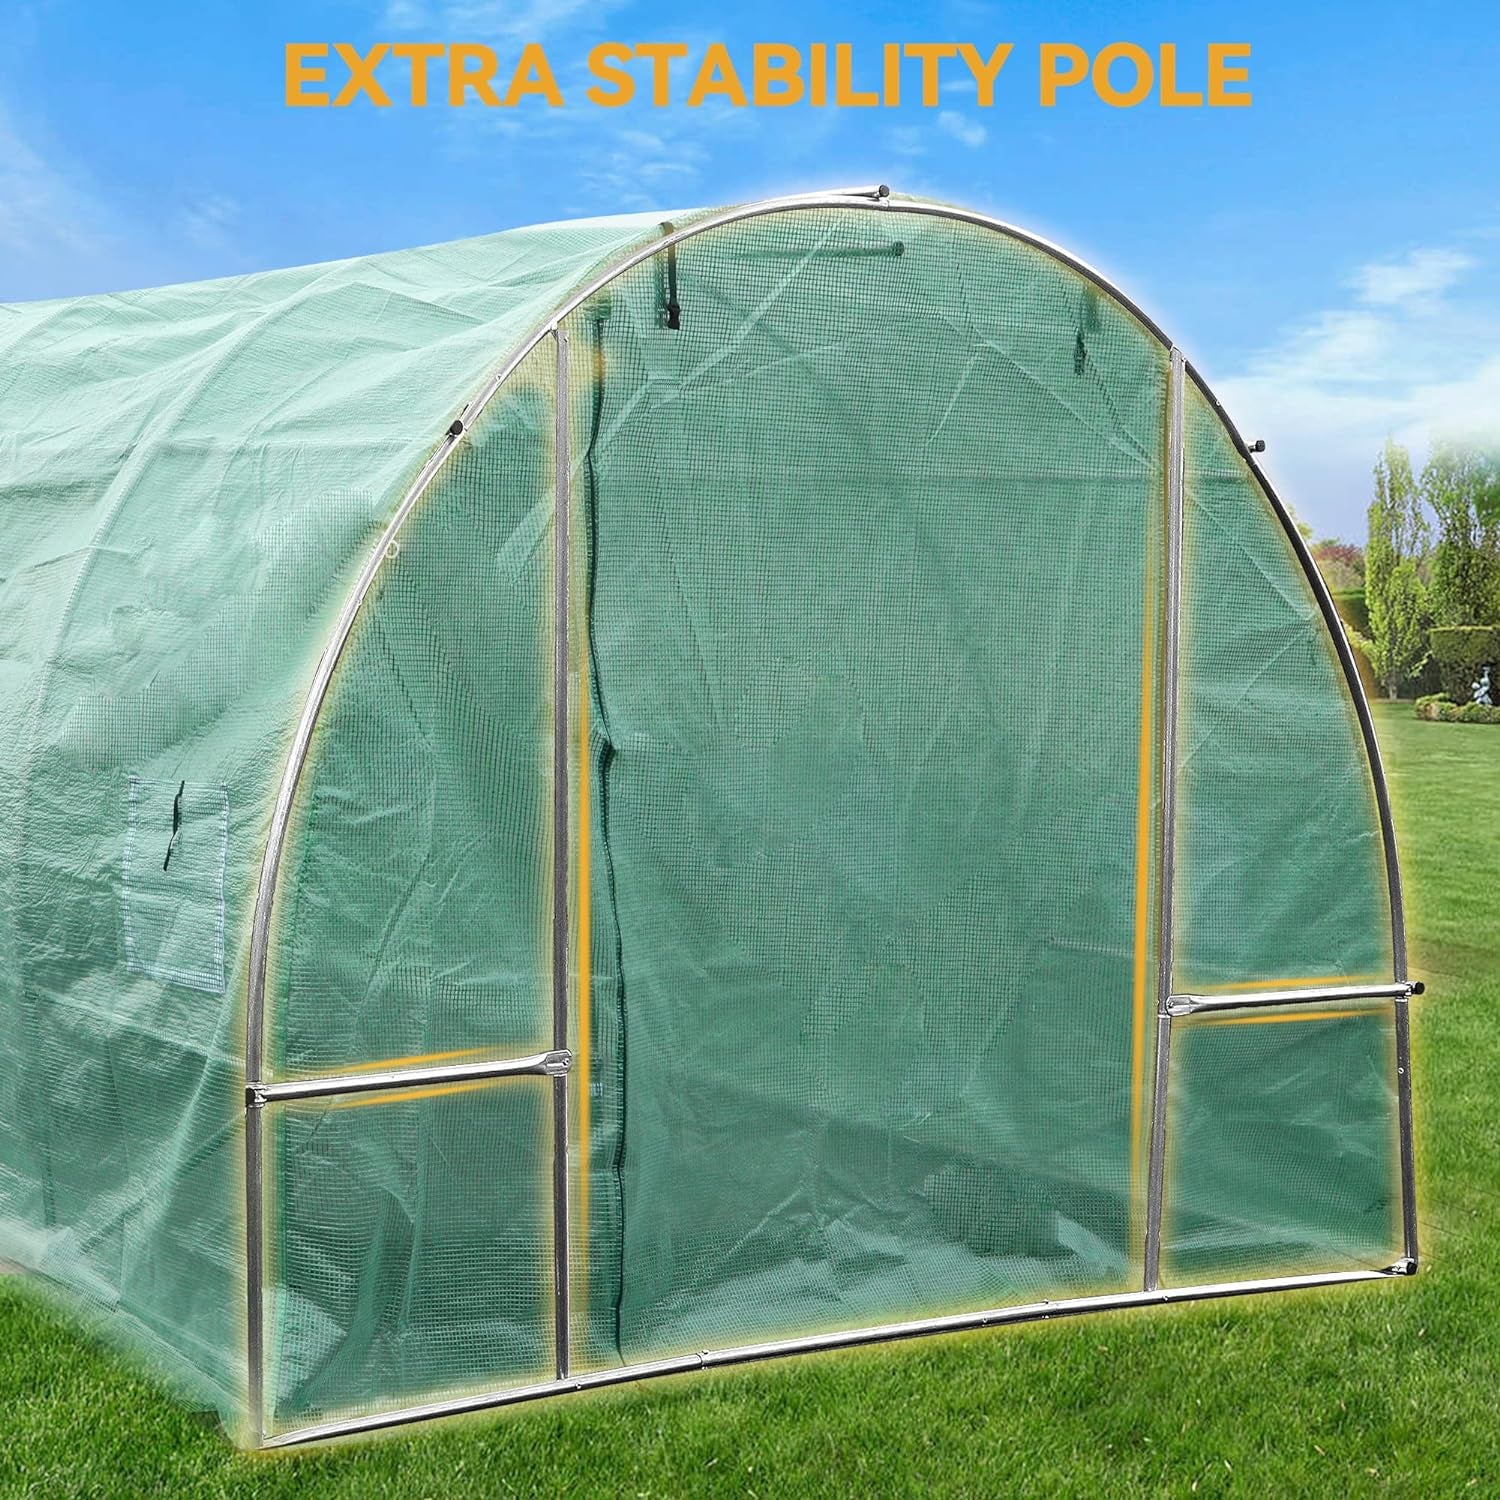 20X10X7Ft Greenhouse Heavy Duty Large Walk-In Greenhouses Tunnel Green Houses Outdoor Portable Hot Plant Gardening Upgraded Galvanized Steel Stake Ropes Zipper Door 7 Crossbars Garden - Design By Technique